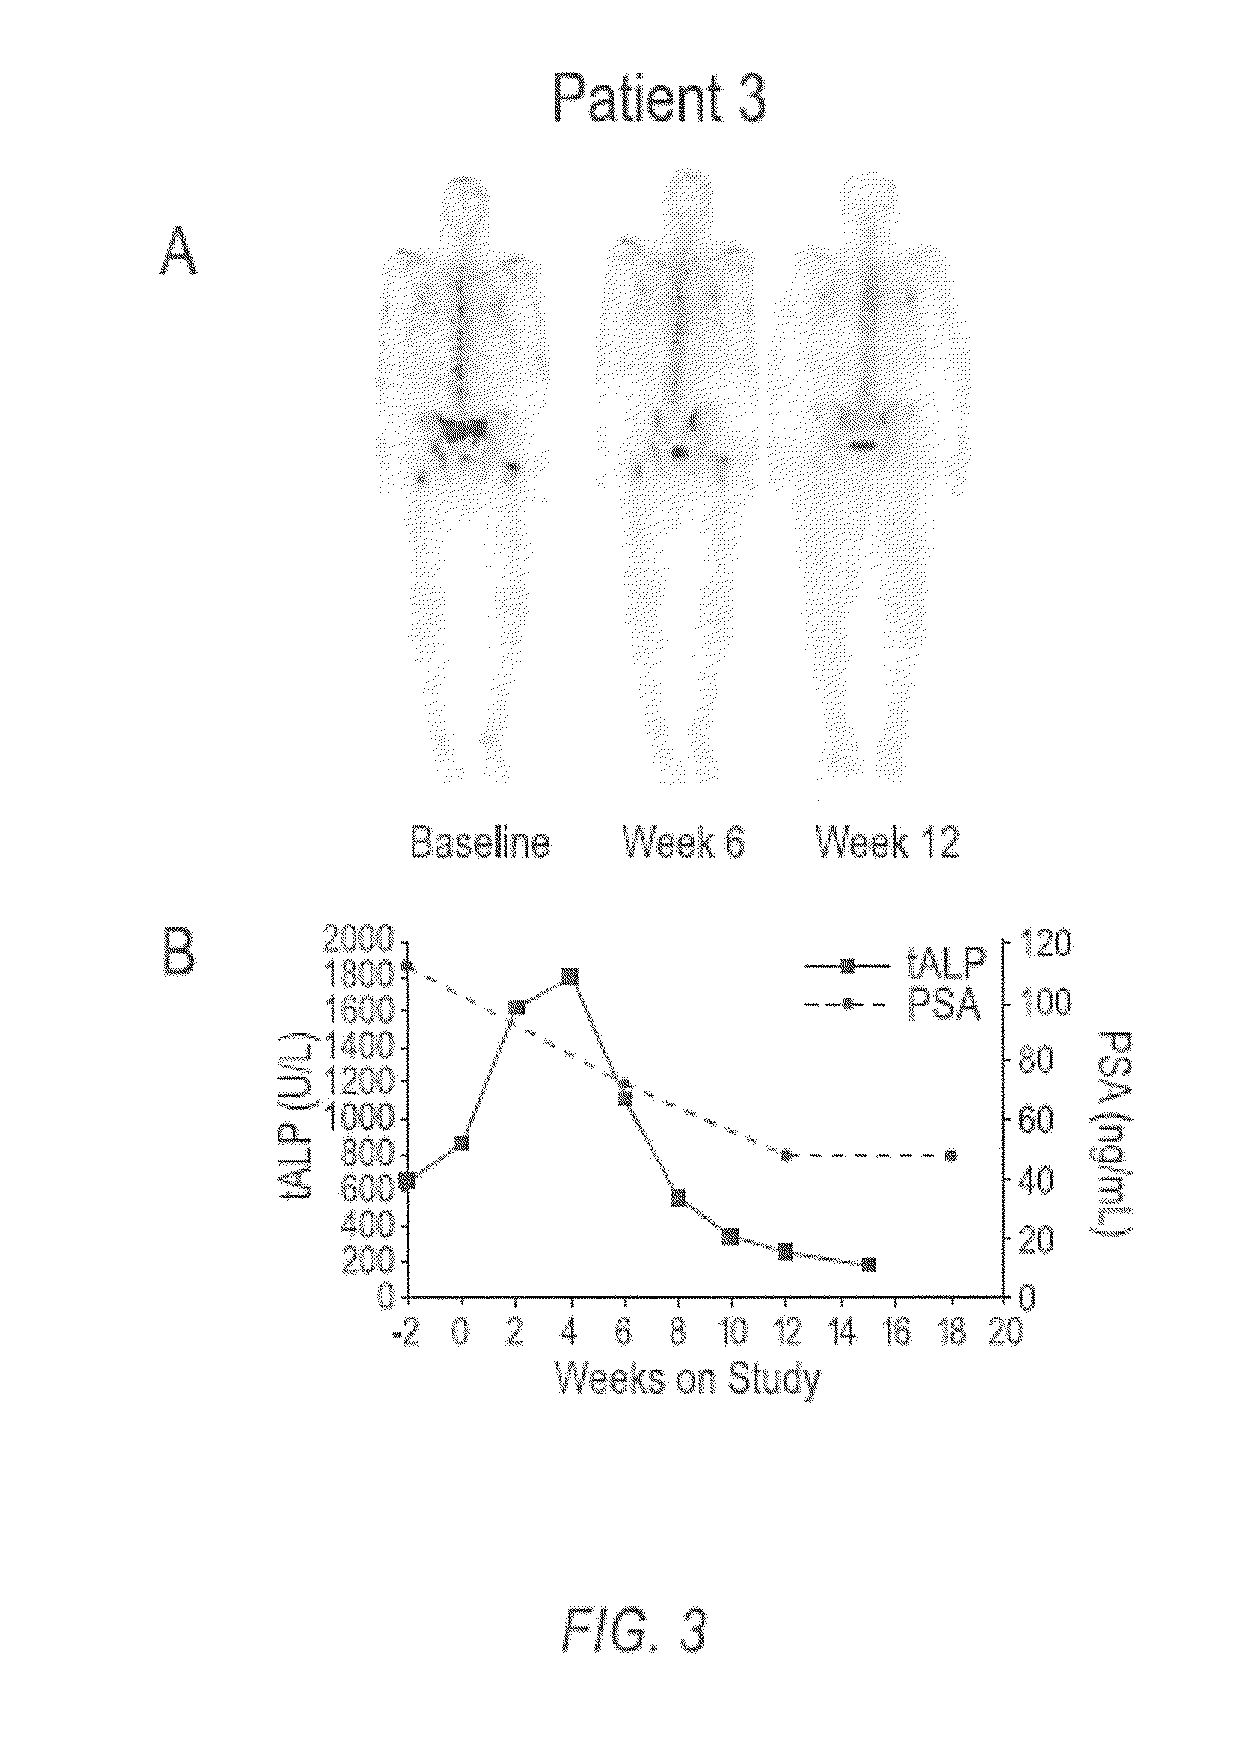 Method of Treating Cancer and Bone Cancer Pain